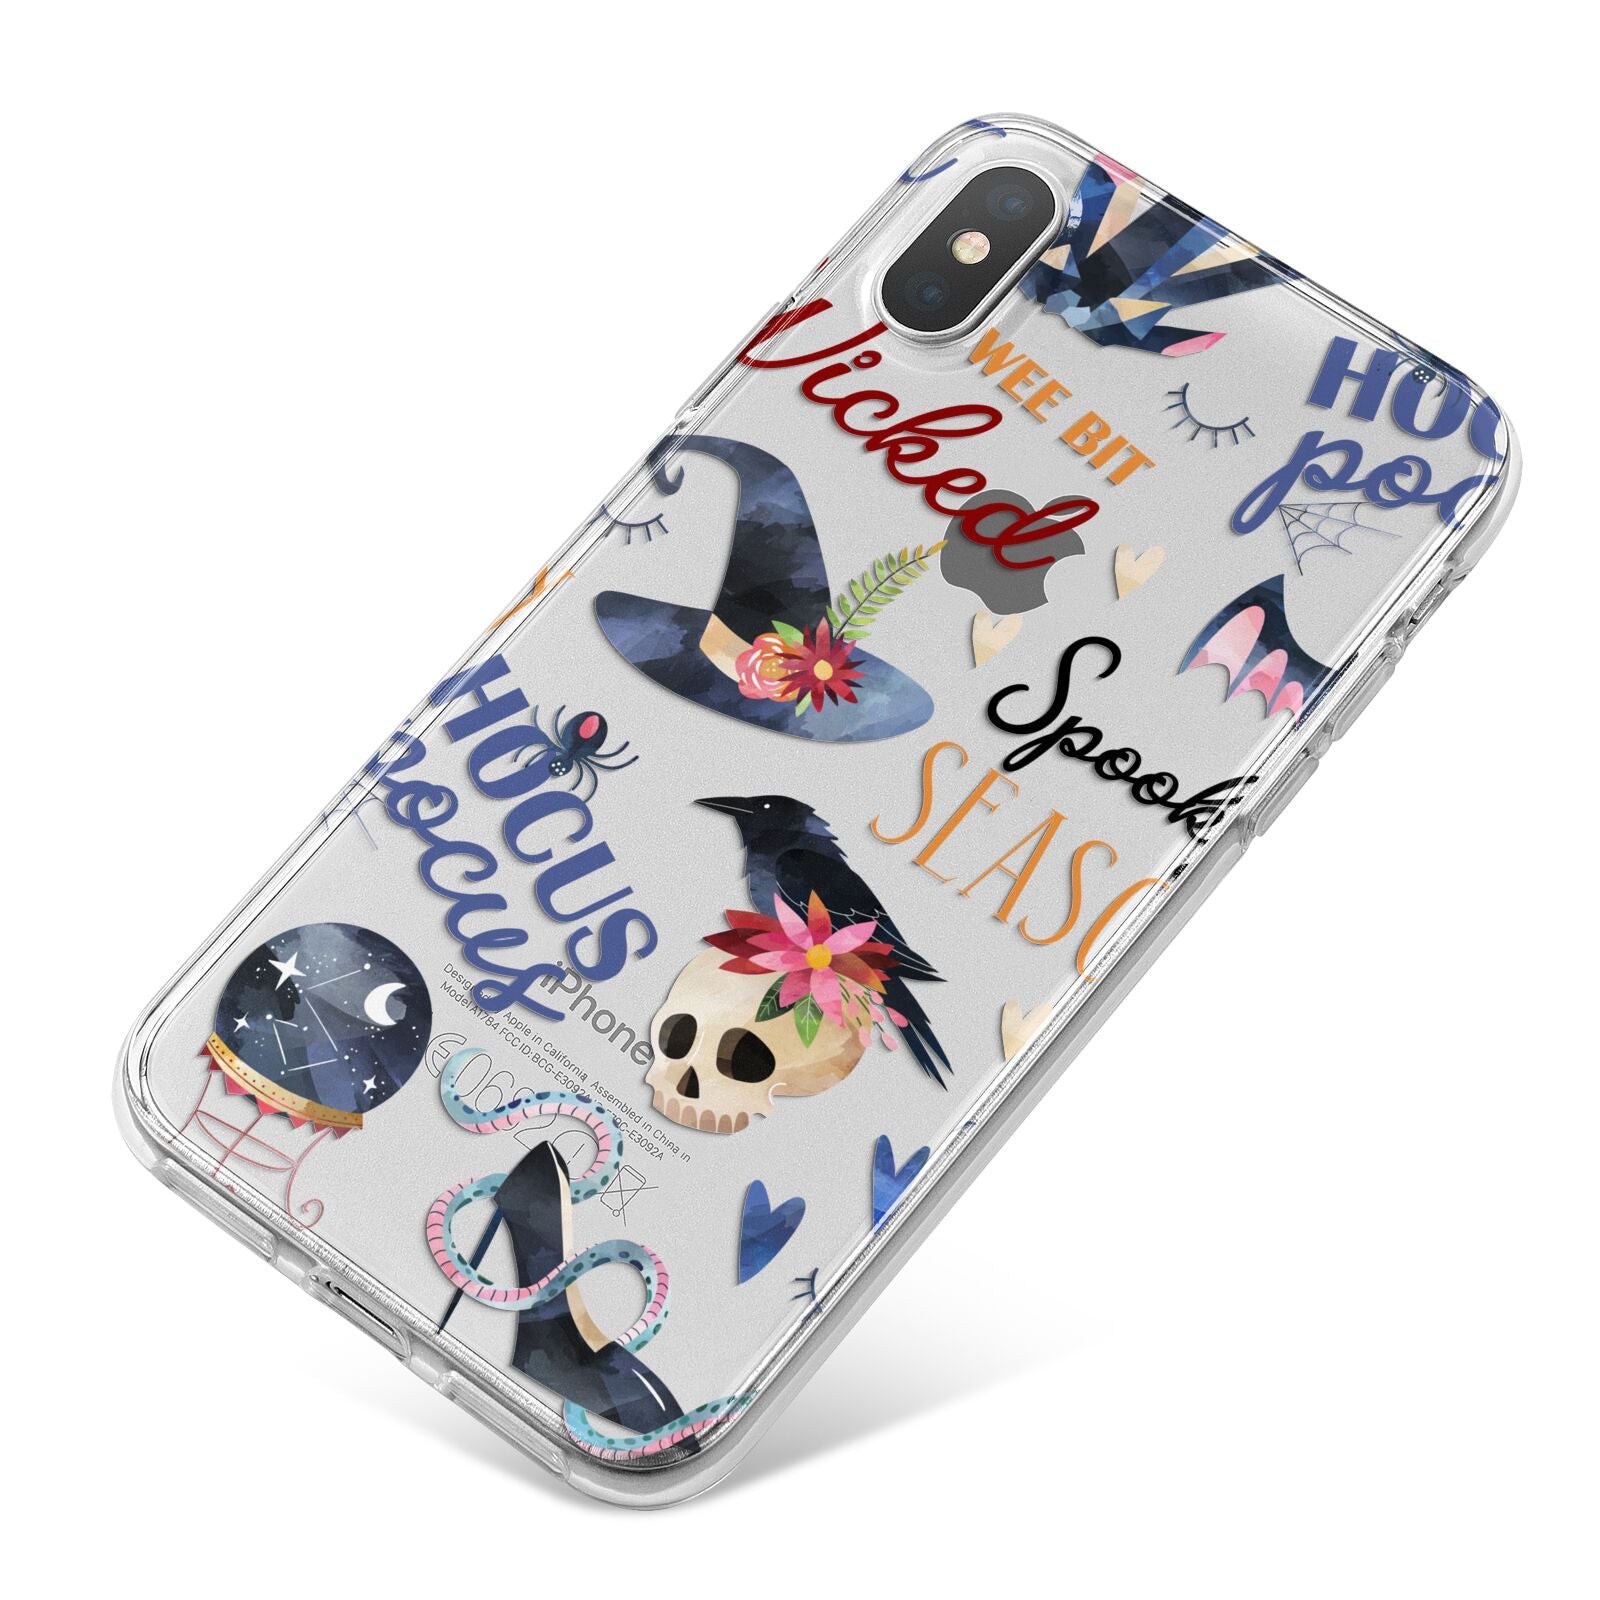 Fun Halloween Catchphrases and Watercolour Illustrations iPhone X Bumper Case on Silver iPhone